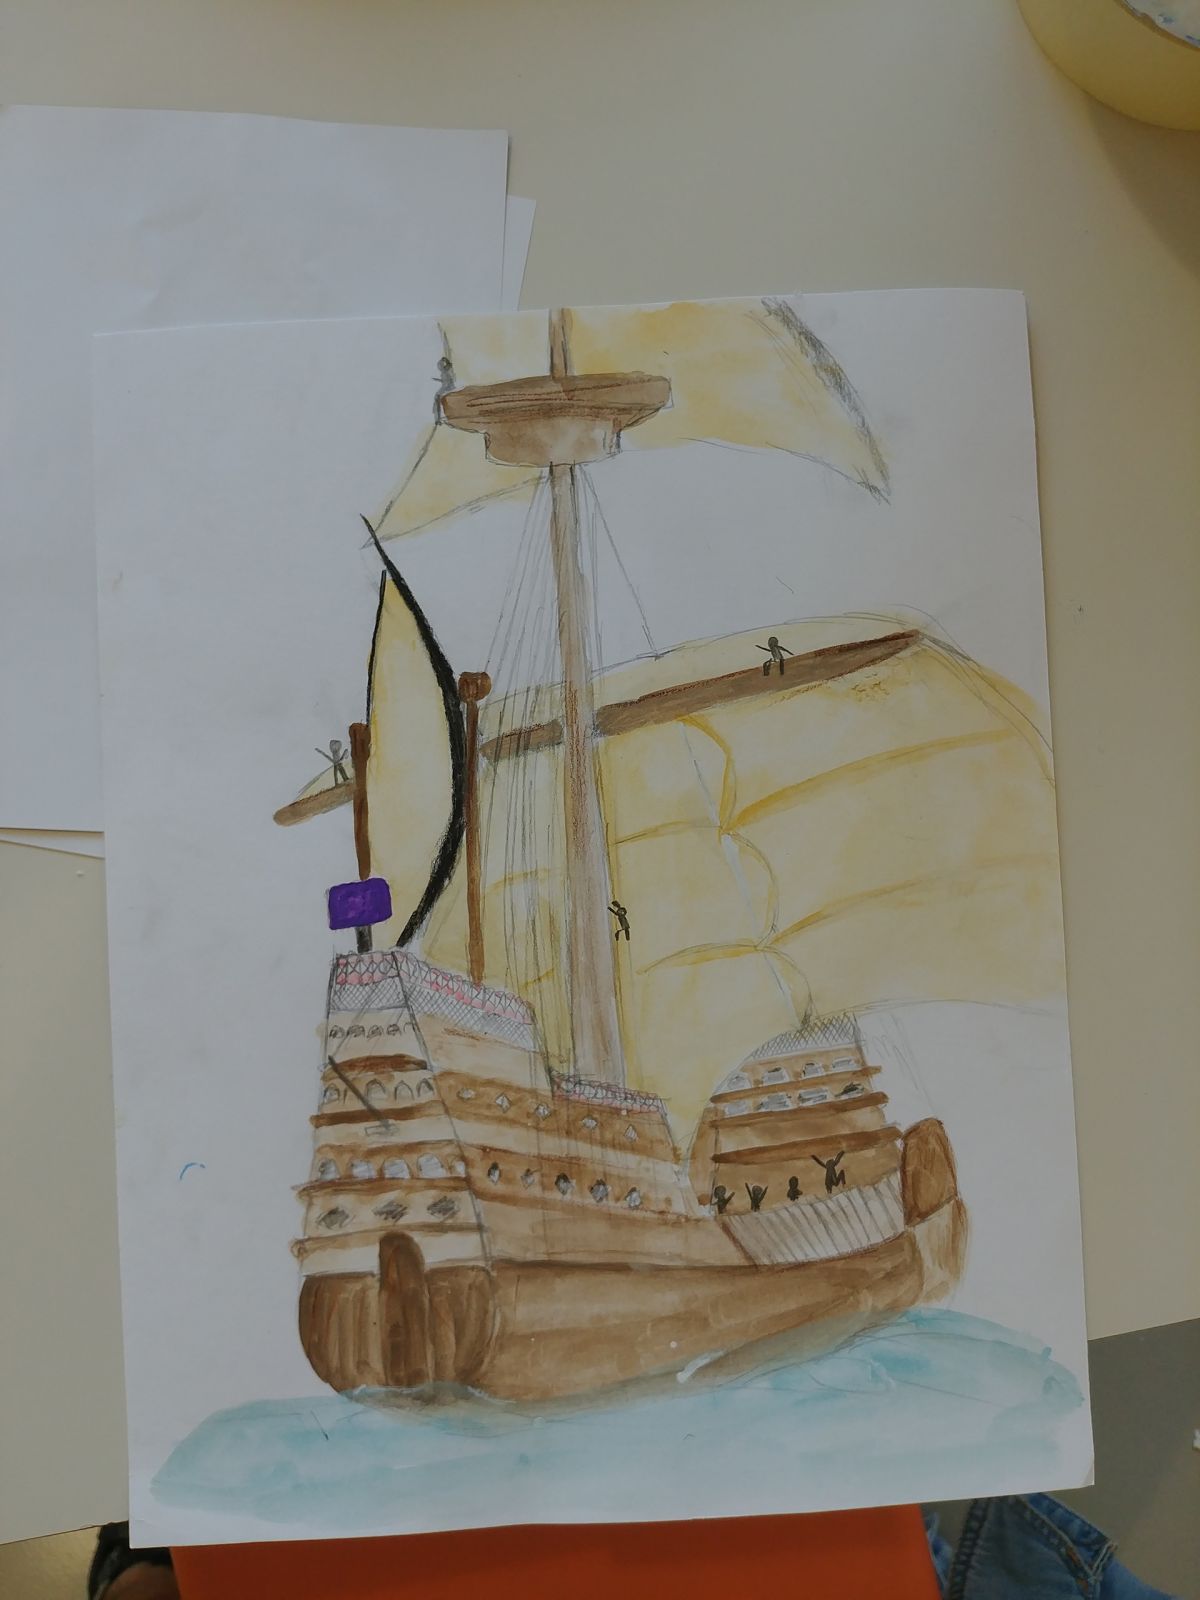 Drawing the 16th c. Carrack.